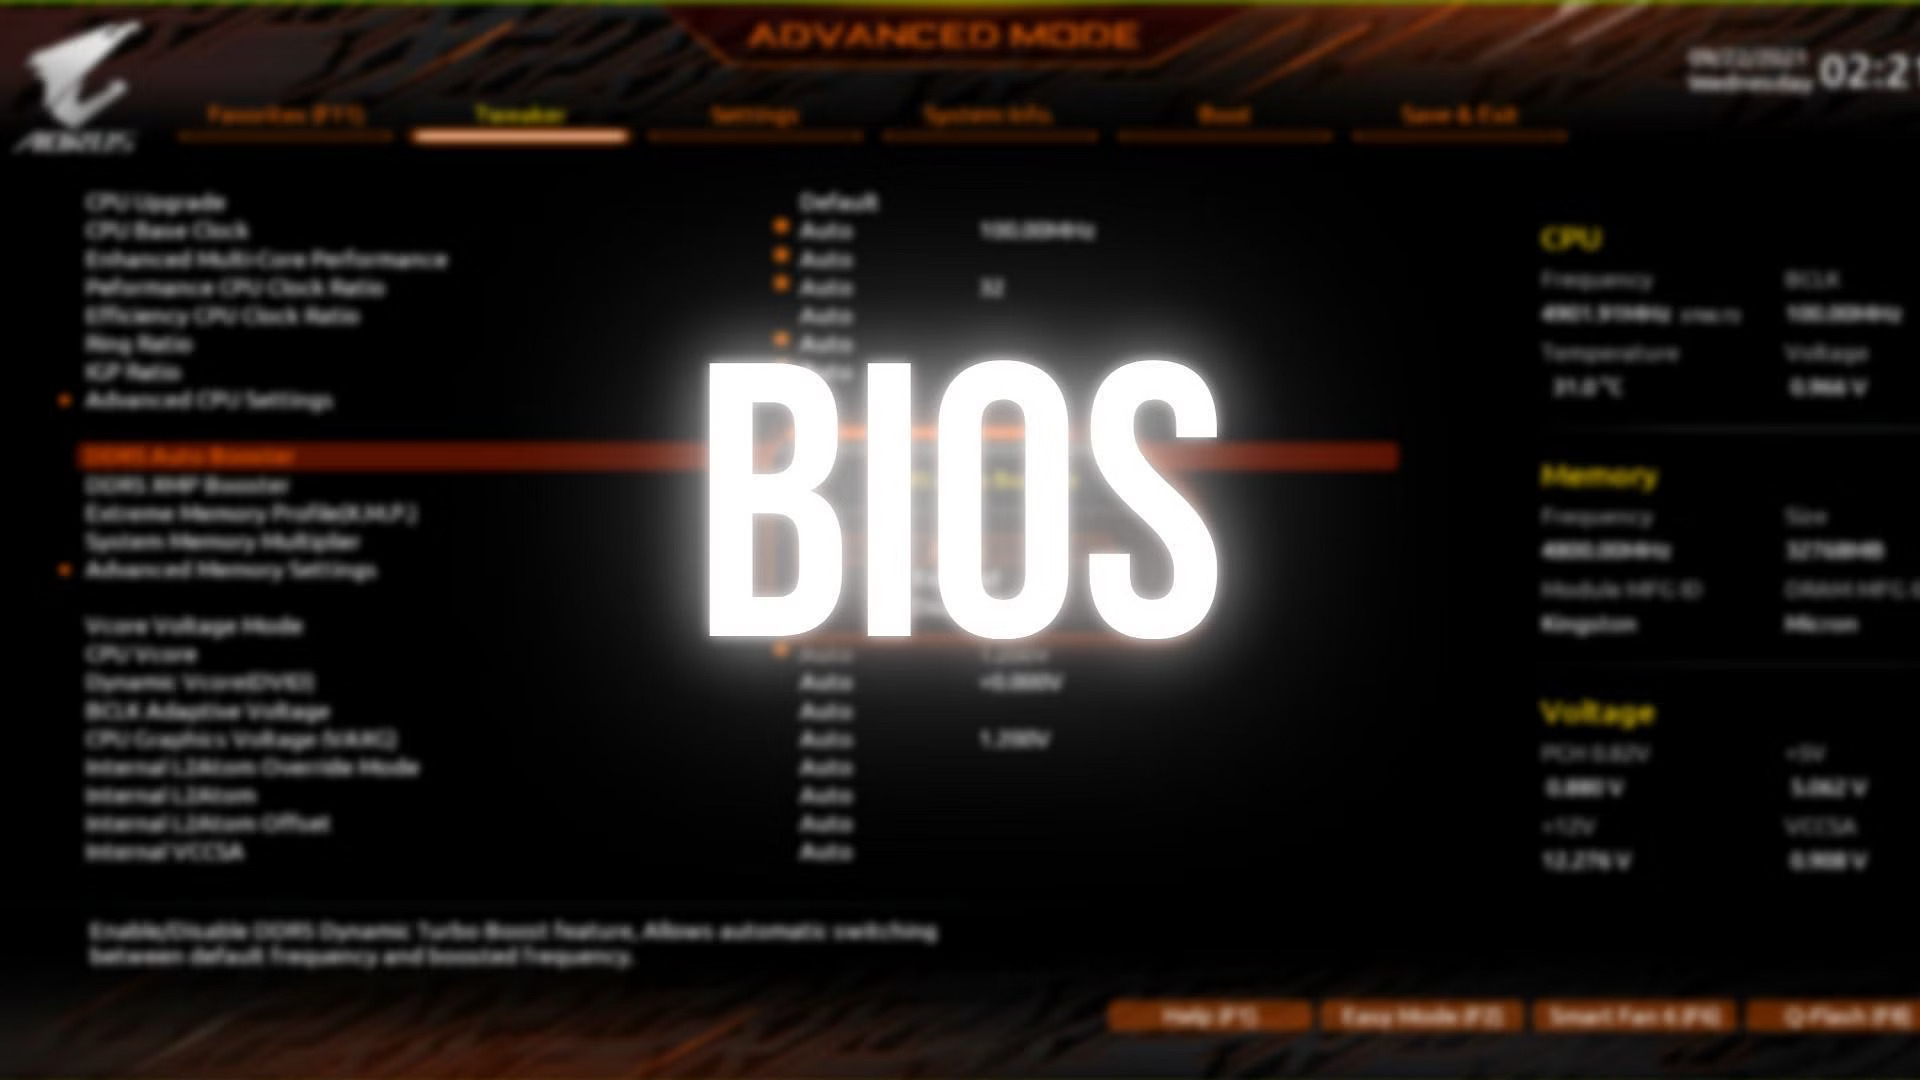 What Settings Are In The BIOS?